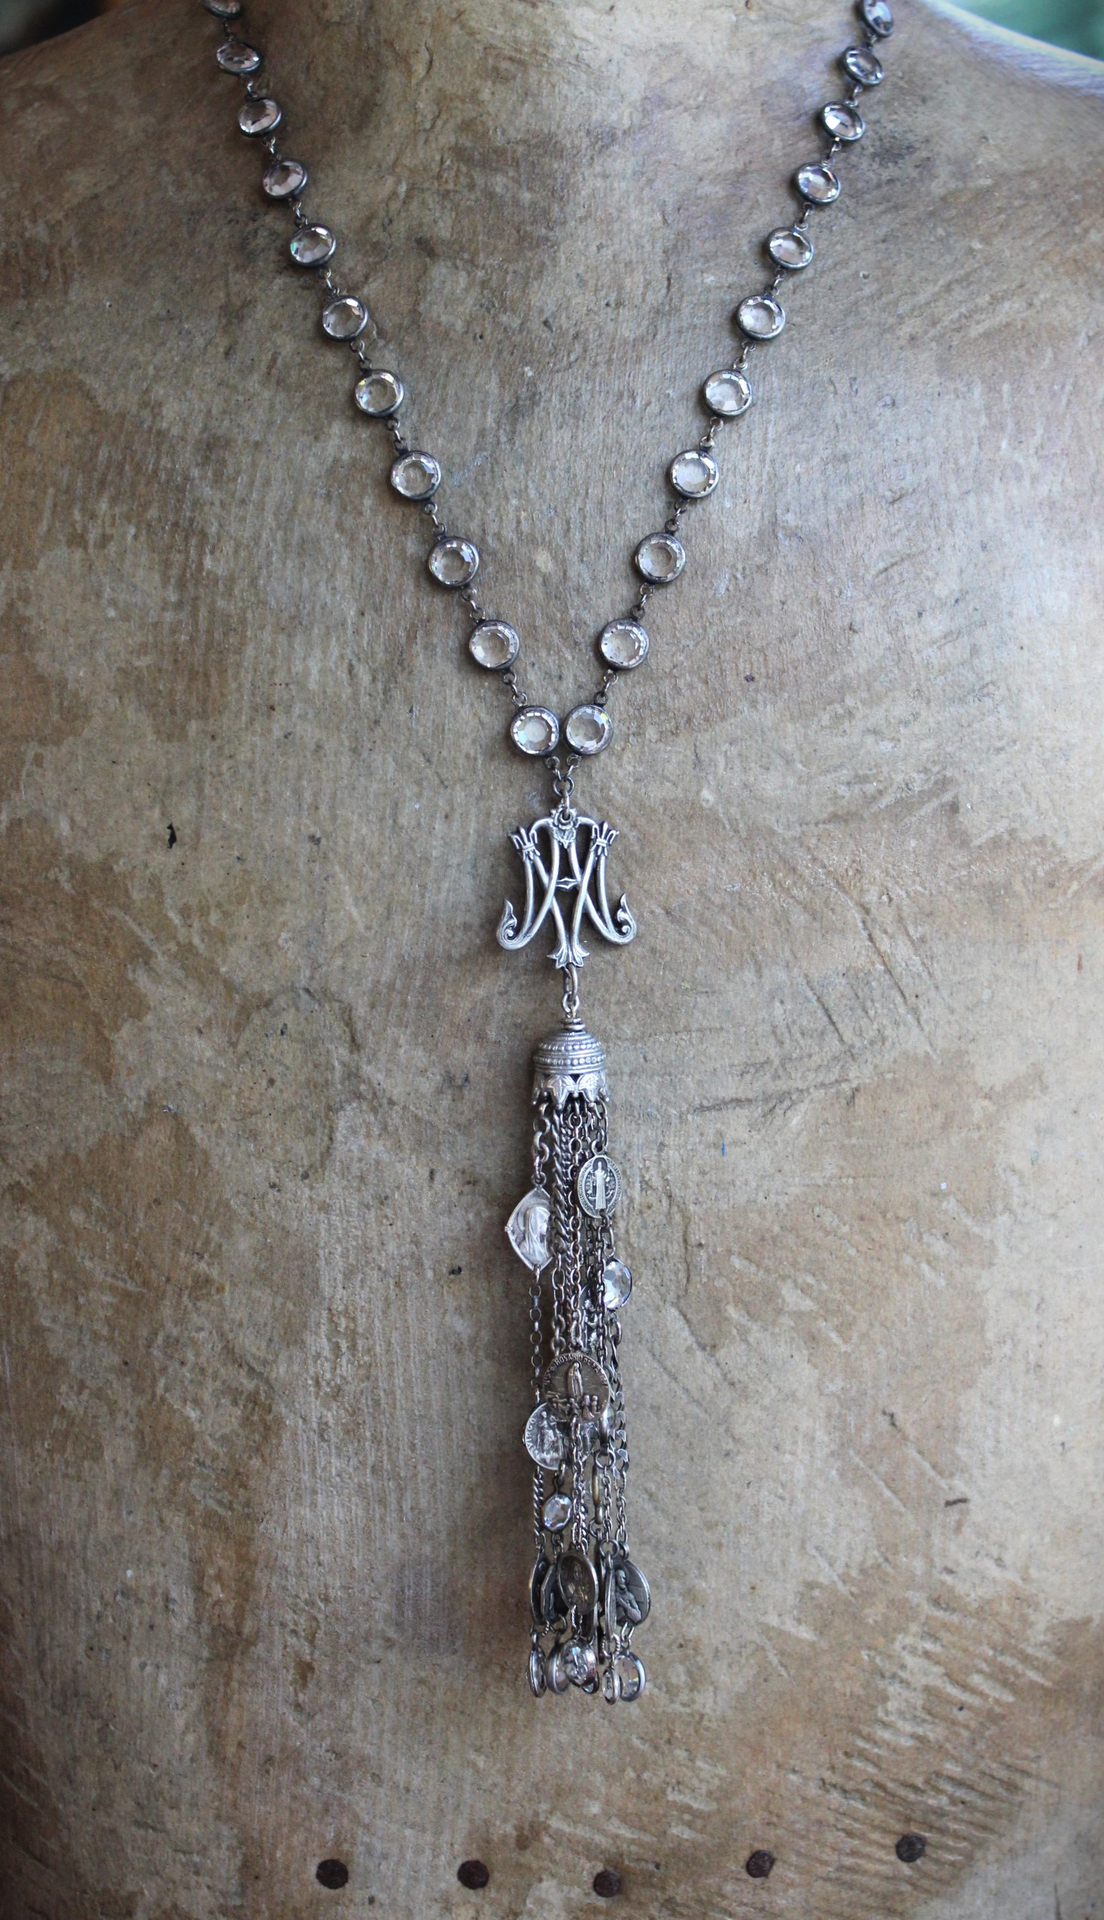 Ave Maria Tassel Necklace with 8 Strand Antique French Medals, Multiple Chain Fragments and Faceted Crystals